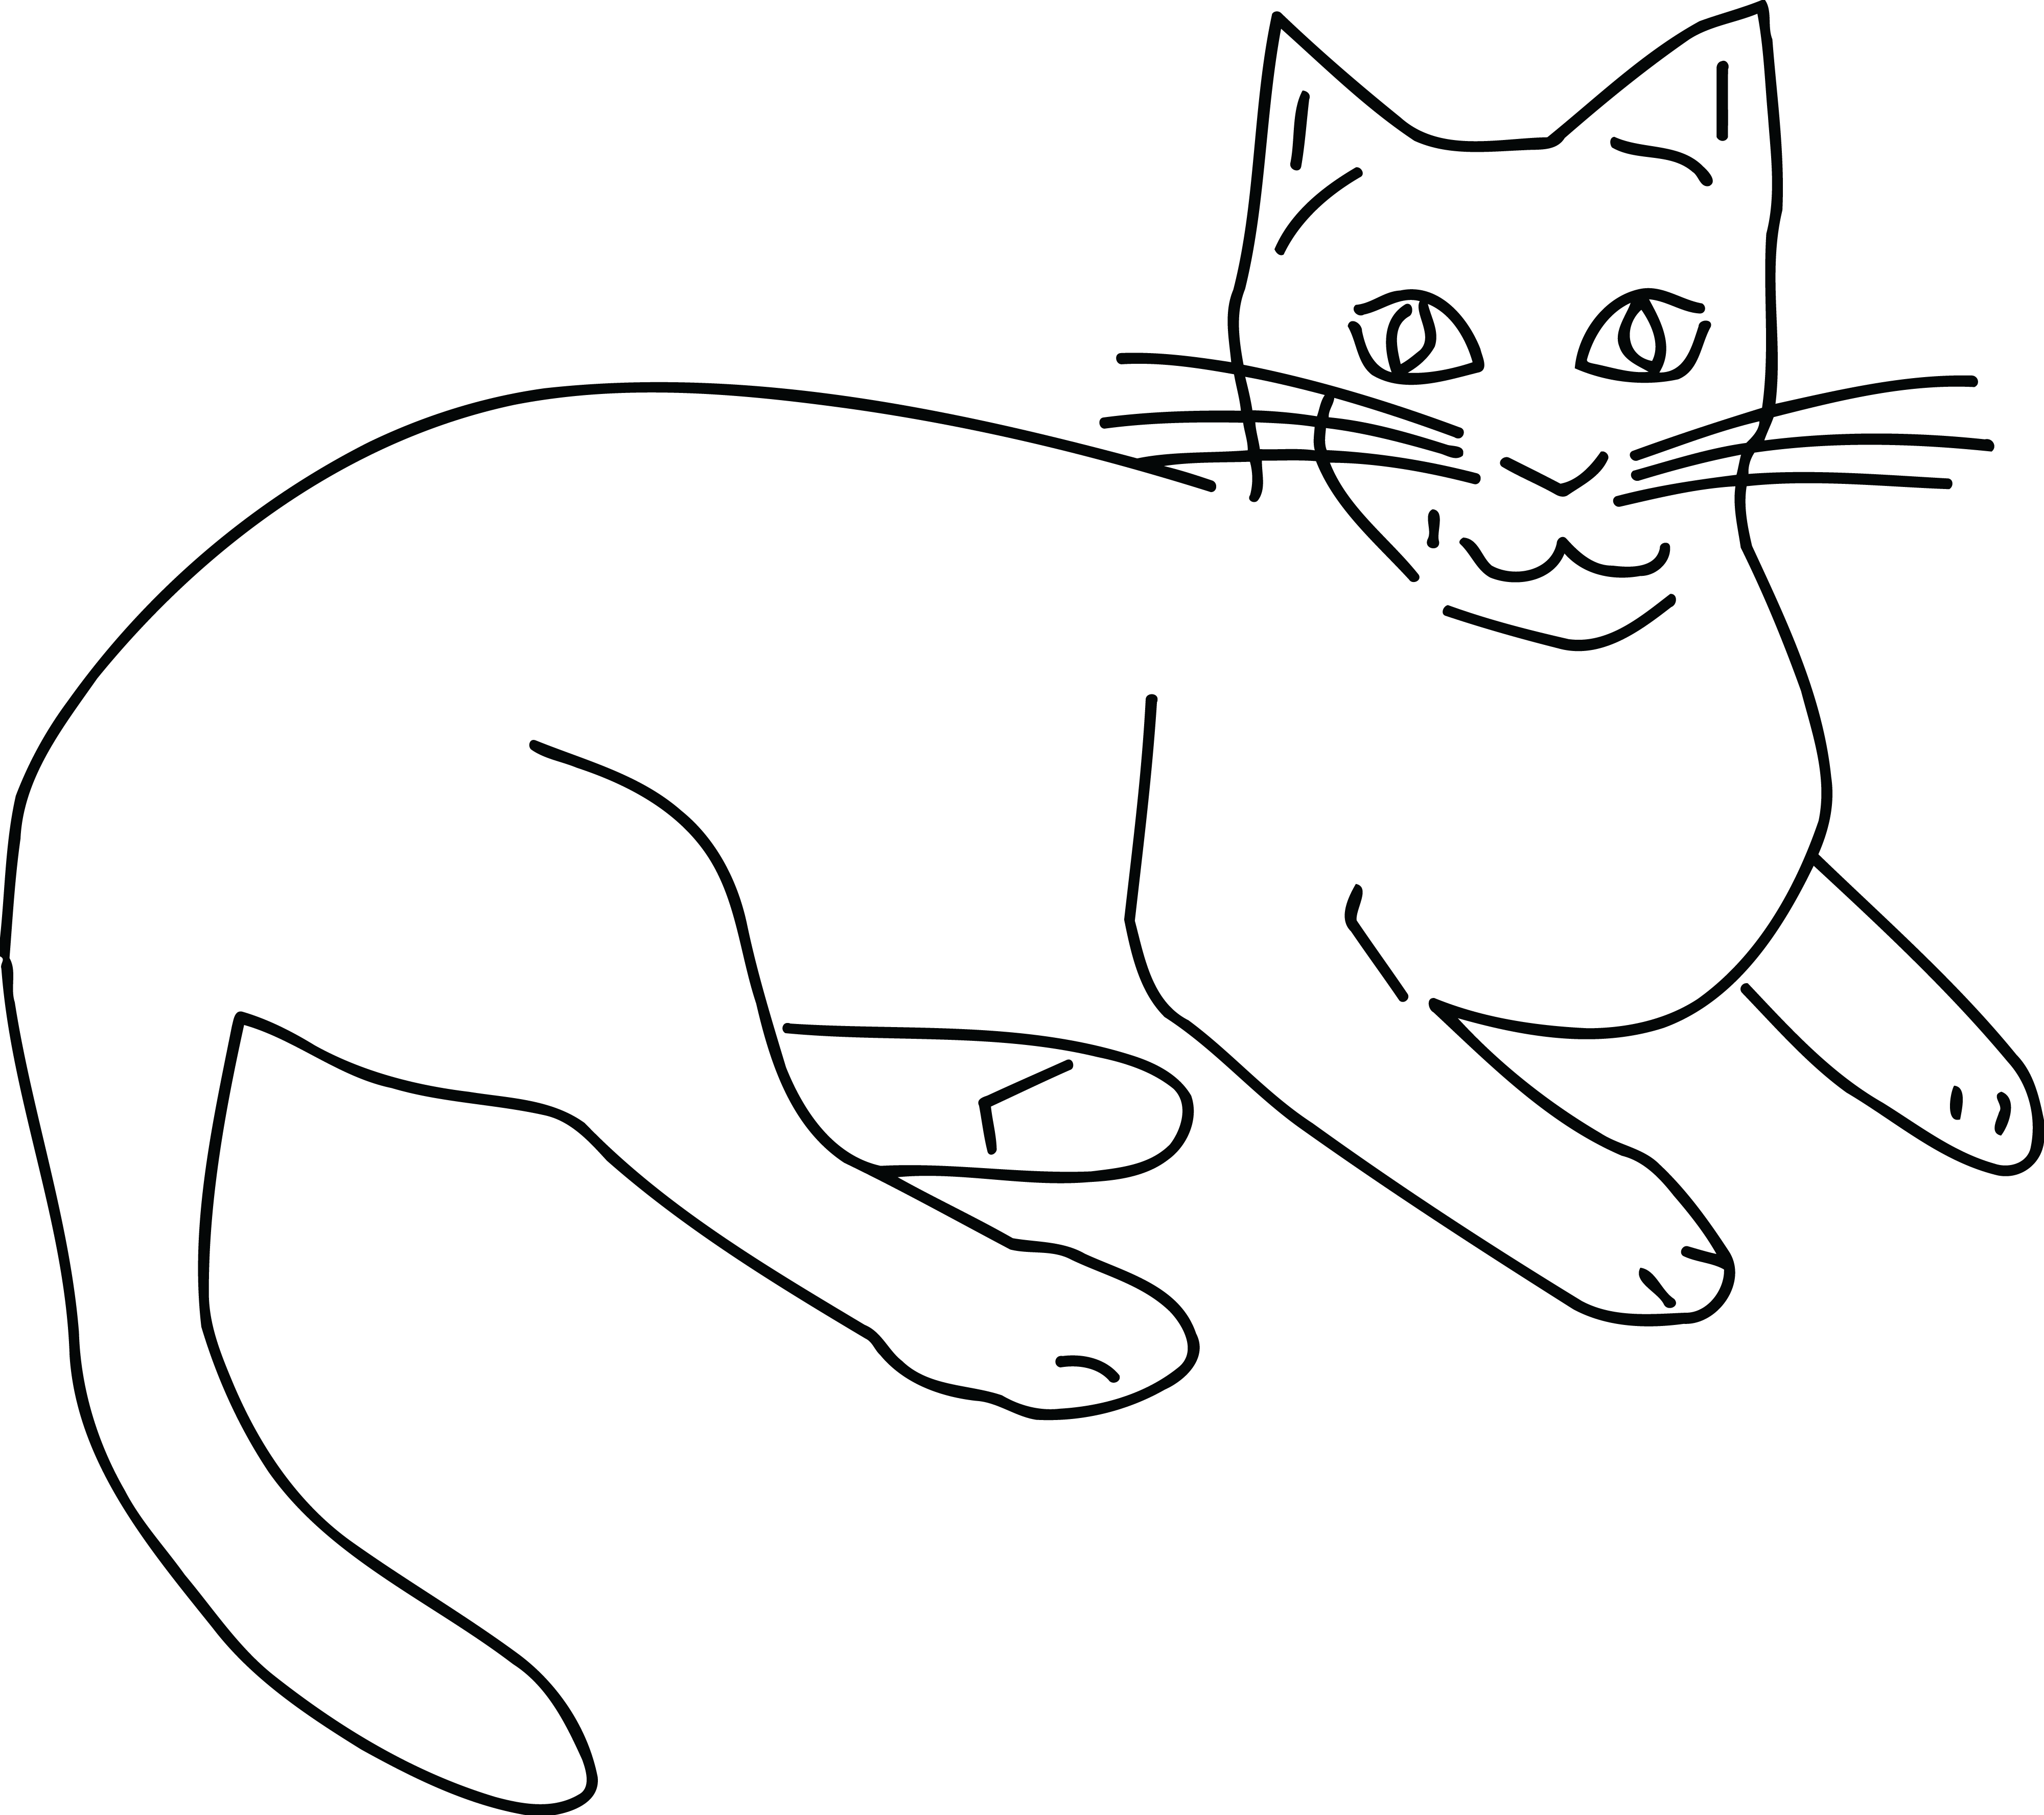 Free Clipart Of A Black And White Cat